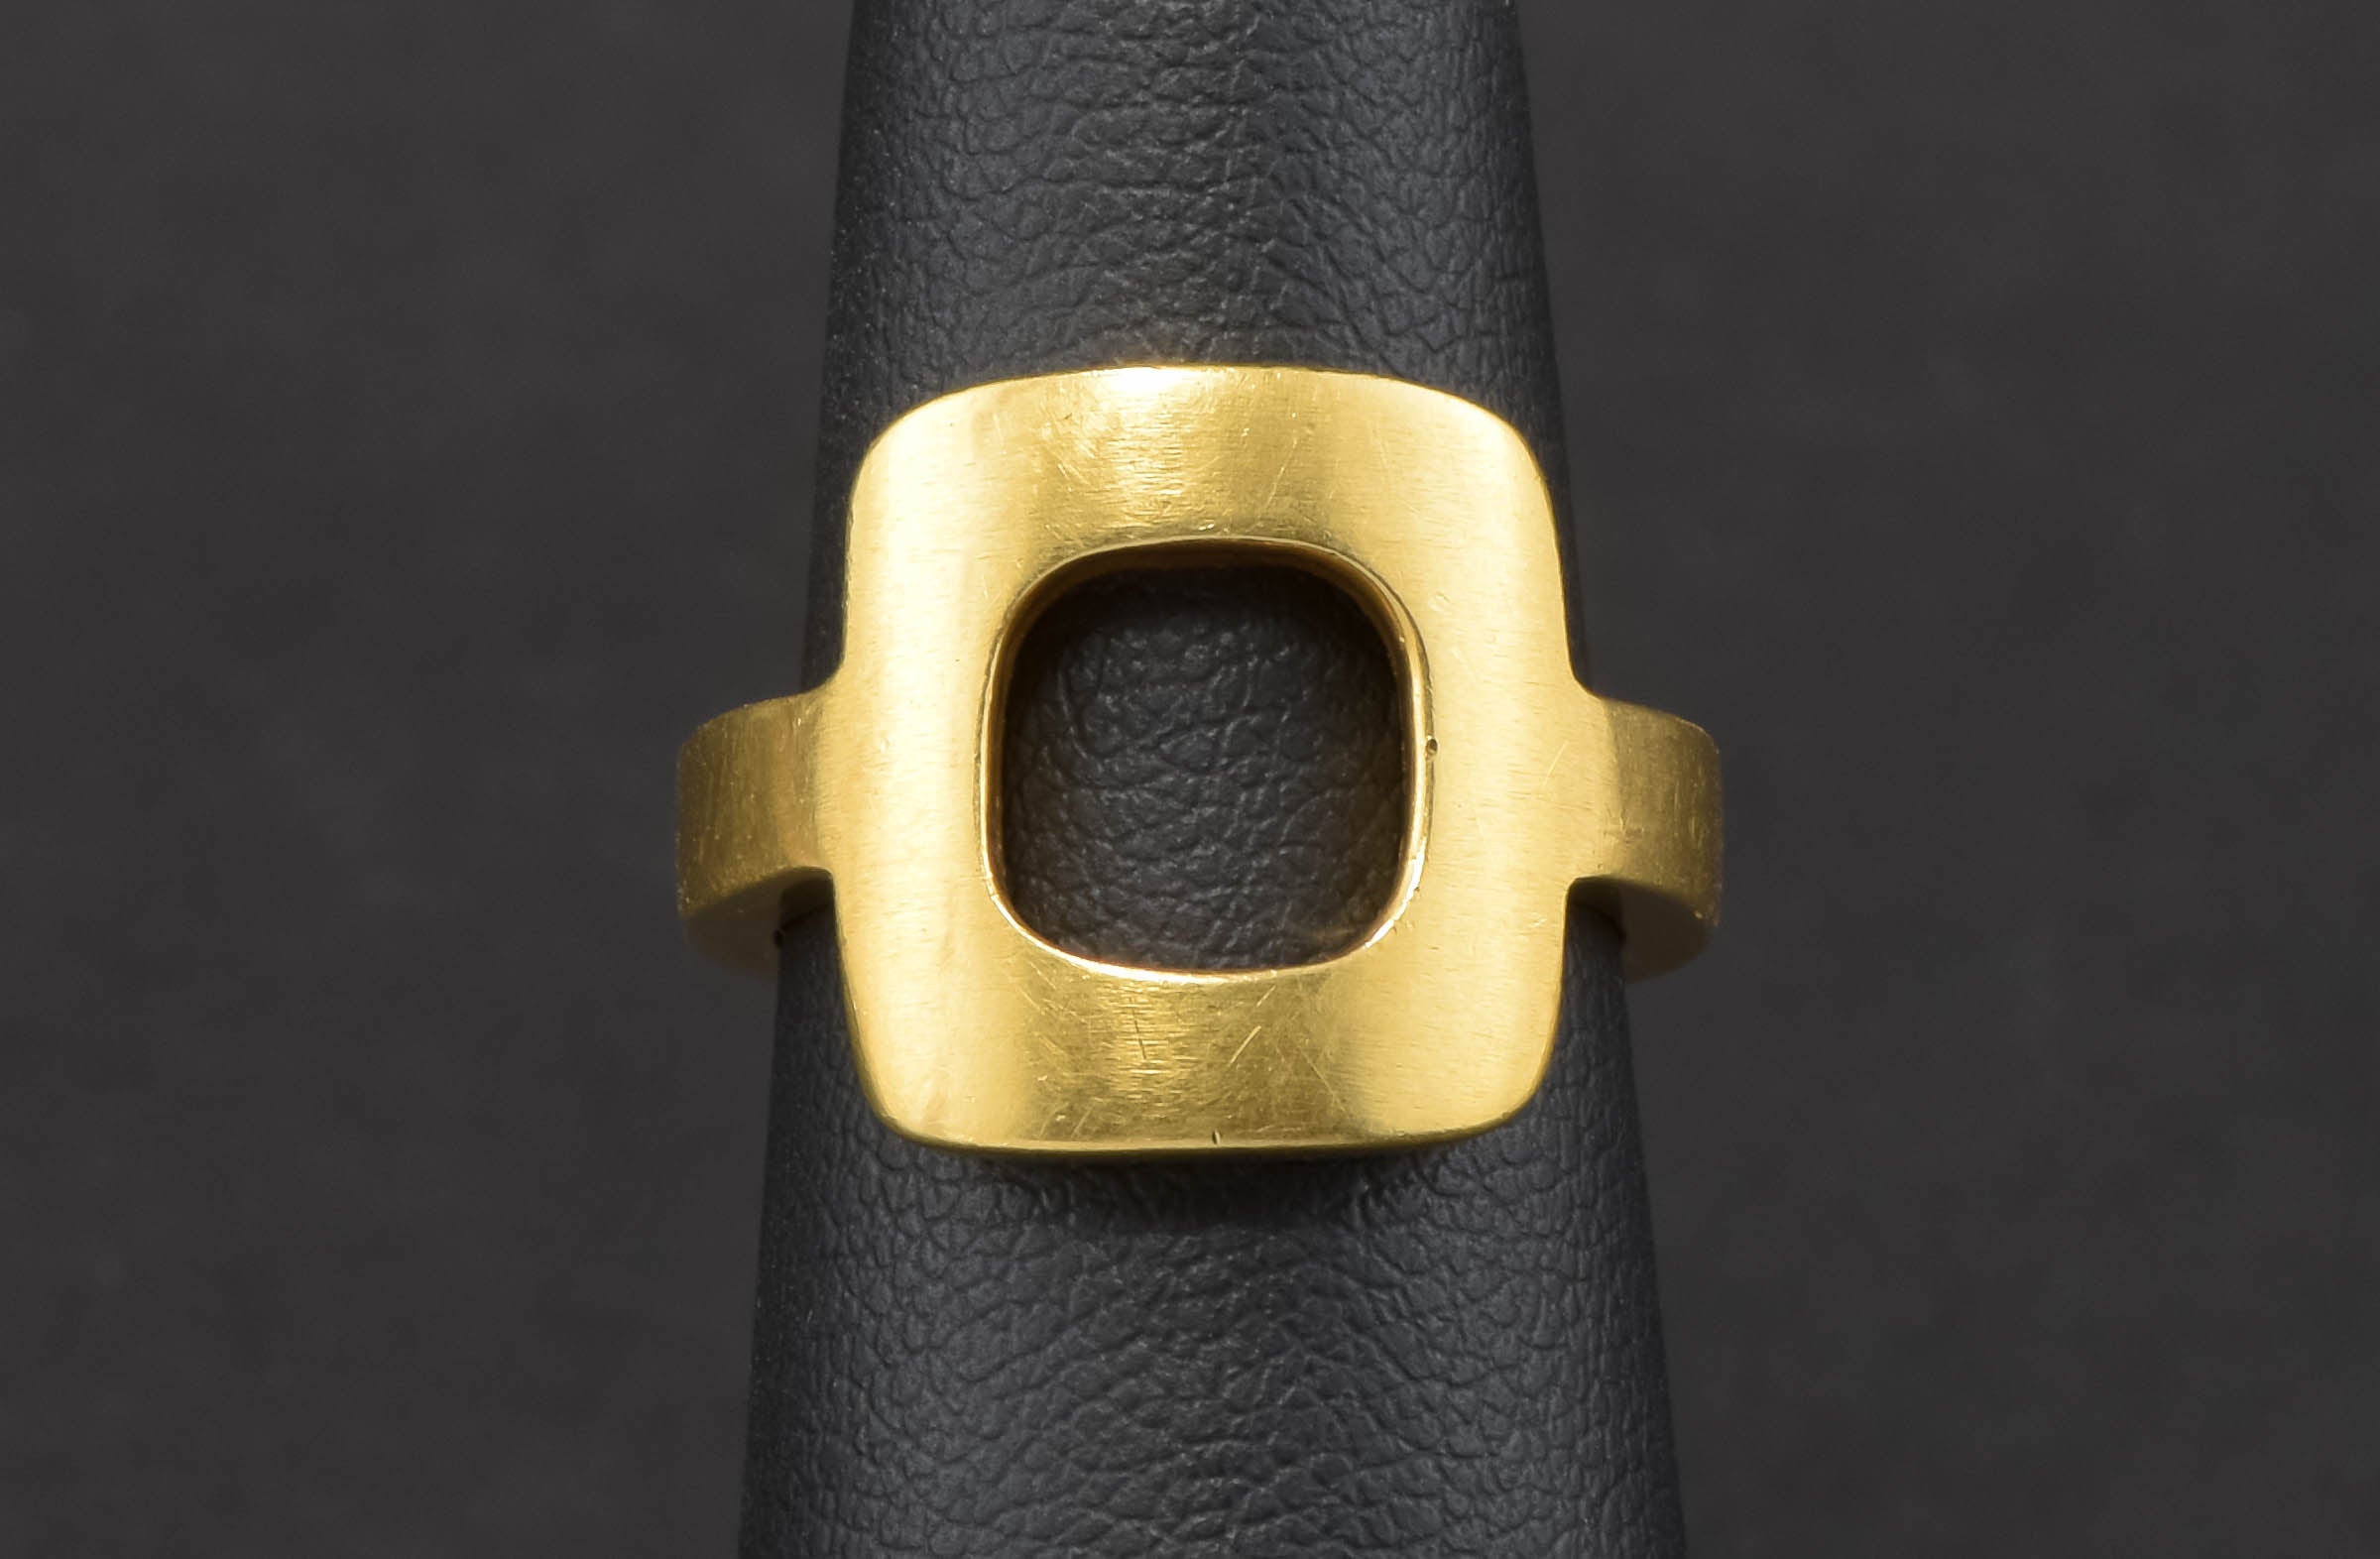 A truly fabulous authentic Jean Dinh Van for Cartier ring dating to the 1960s....hallmarked for both the French jewelry designer and Cartier....

Crafted of beautiful, buttery 18K yellow gold, the ring features a strong, simple modernist design with